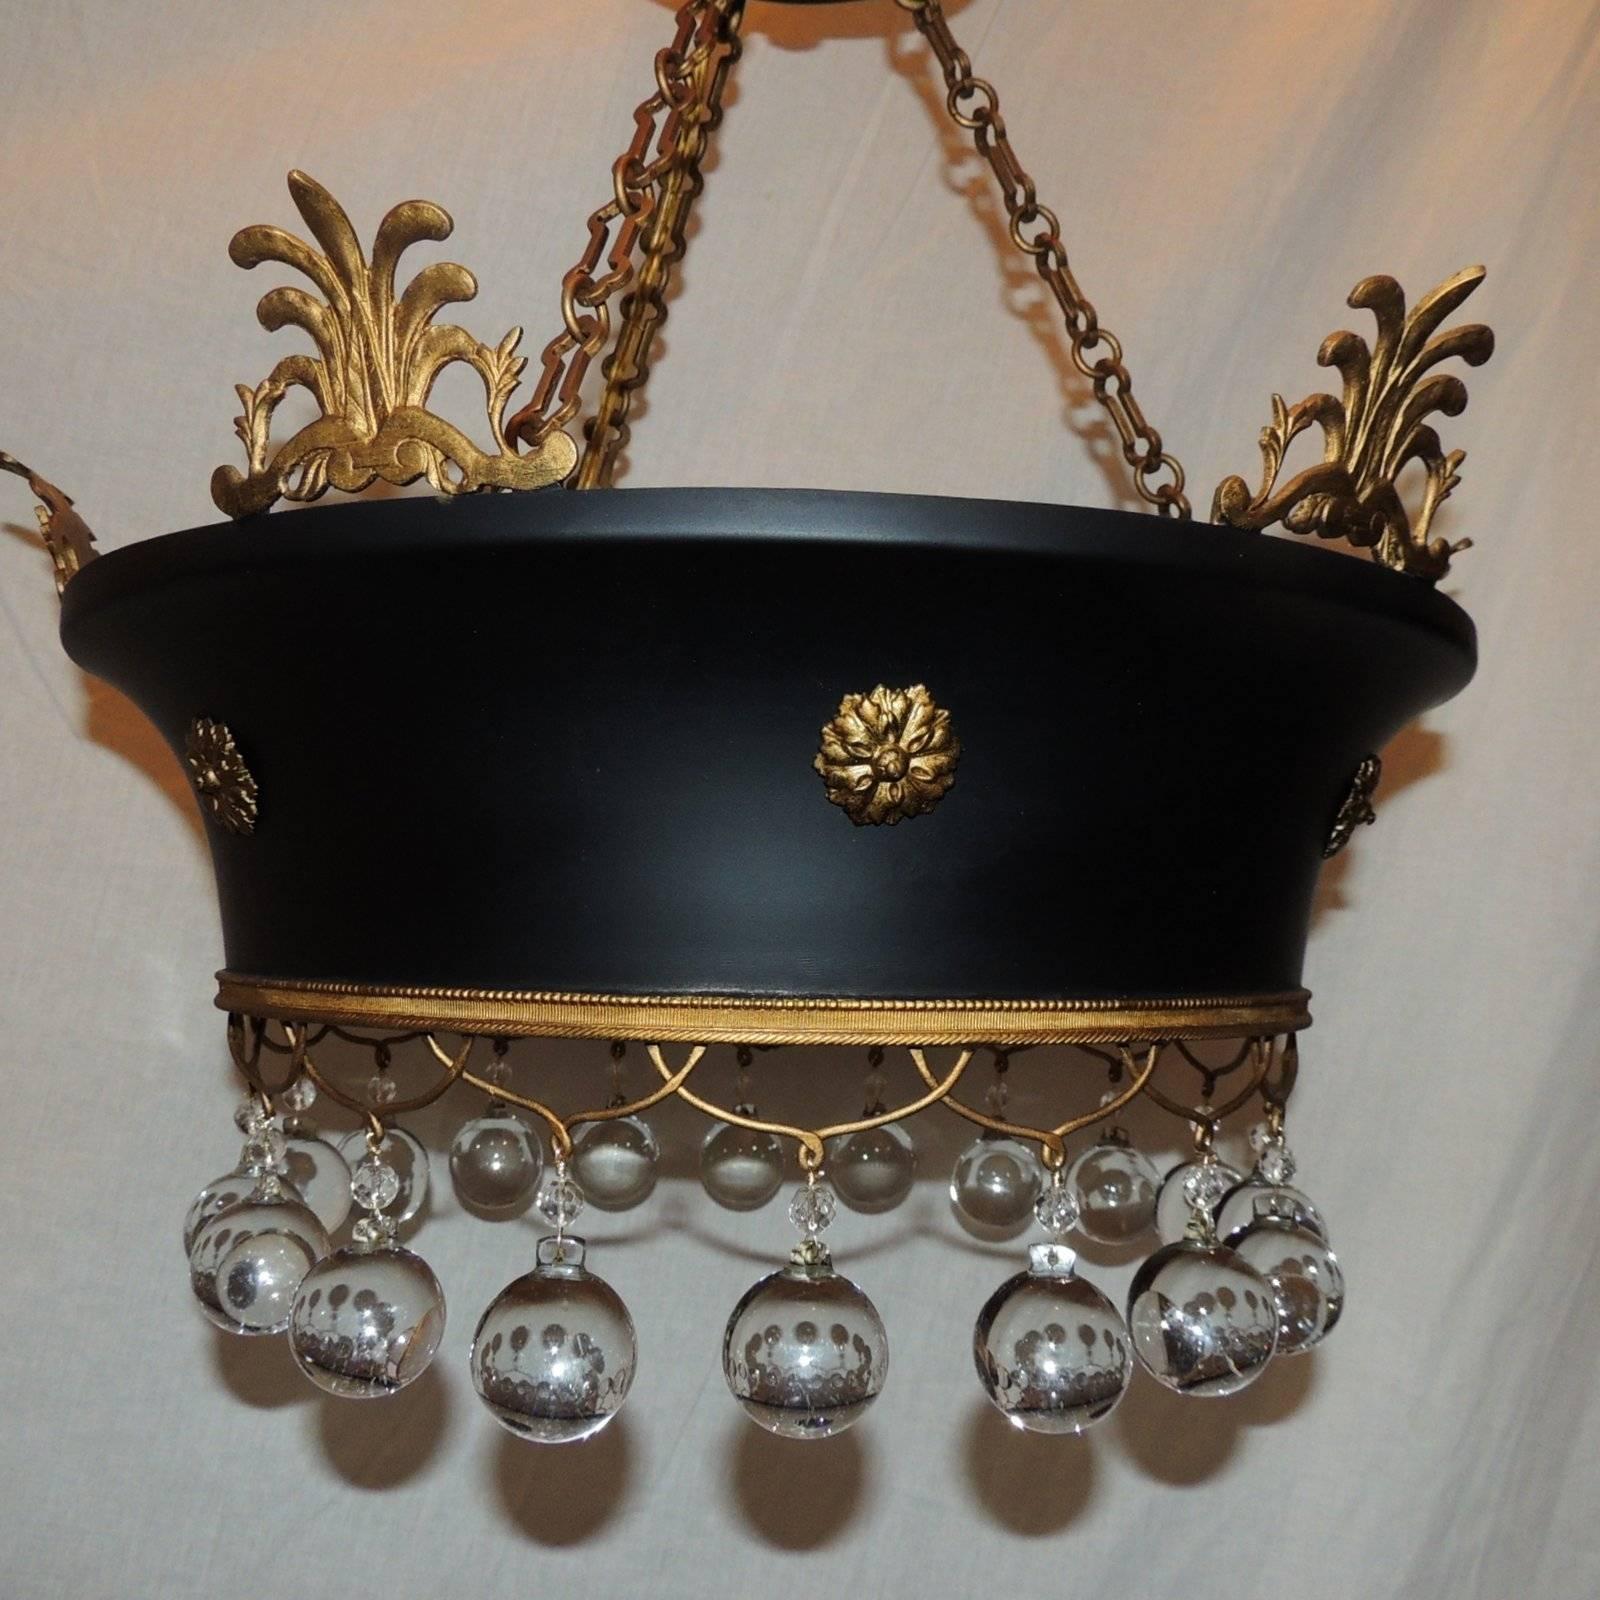 Mid-20th Century French Empire Doré Bronze Tole Basket Frosted Neoclassical Chandelier Fixture